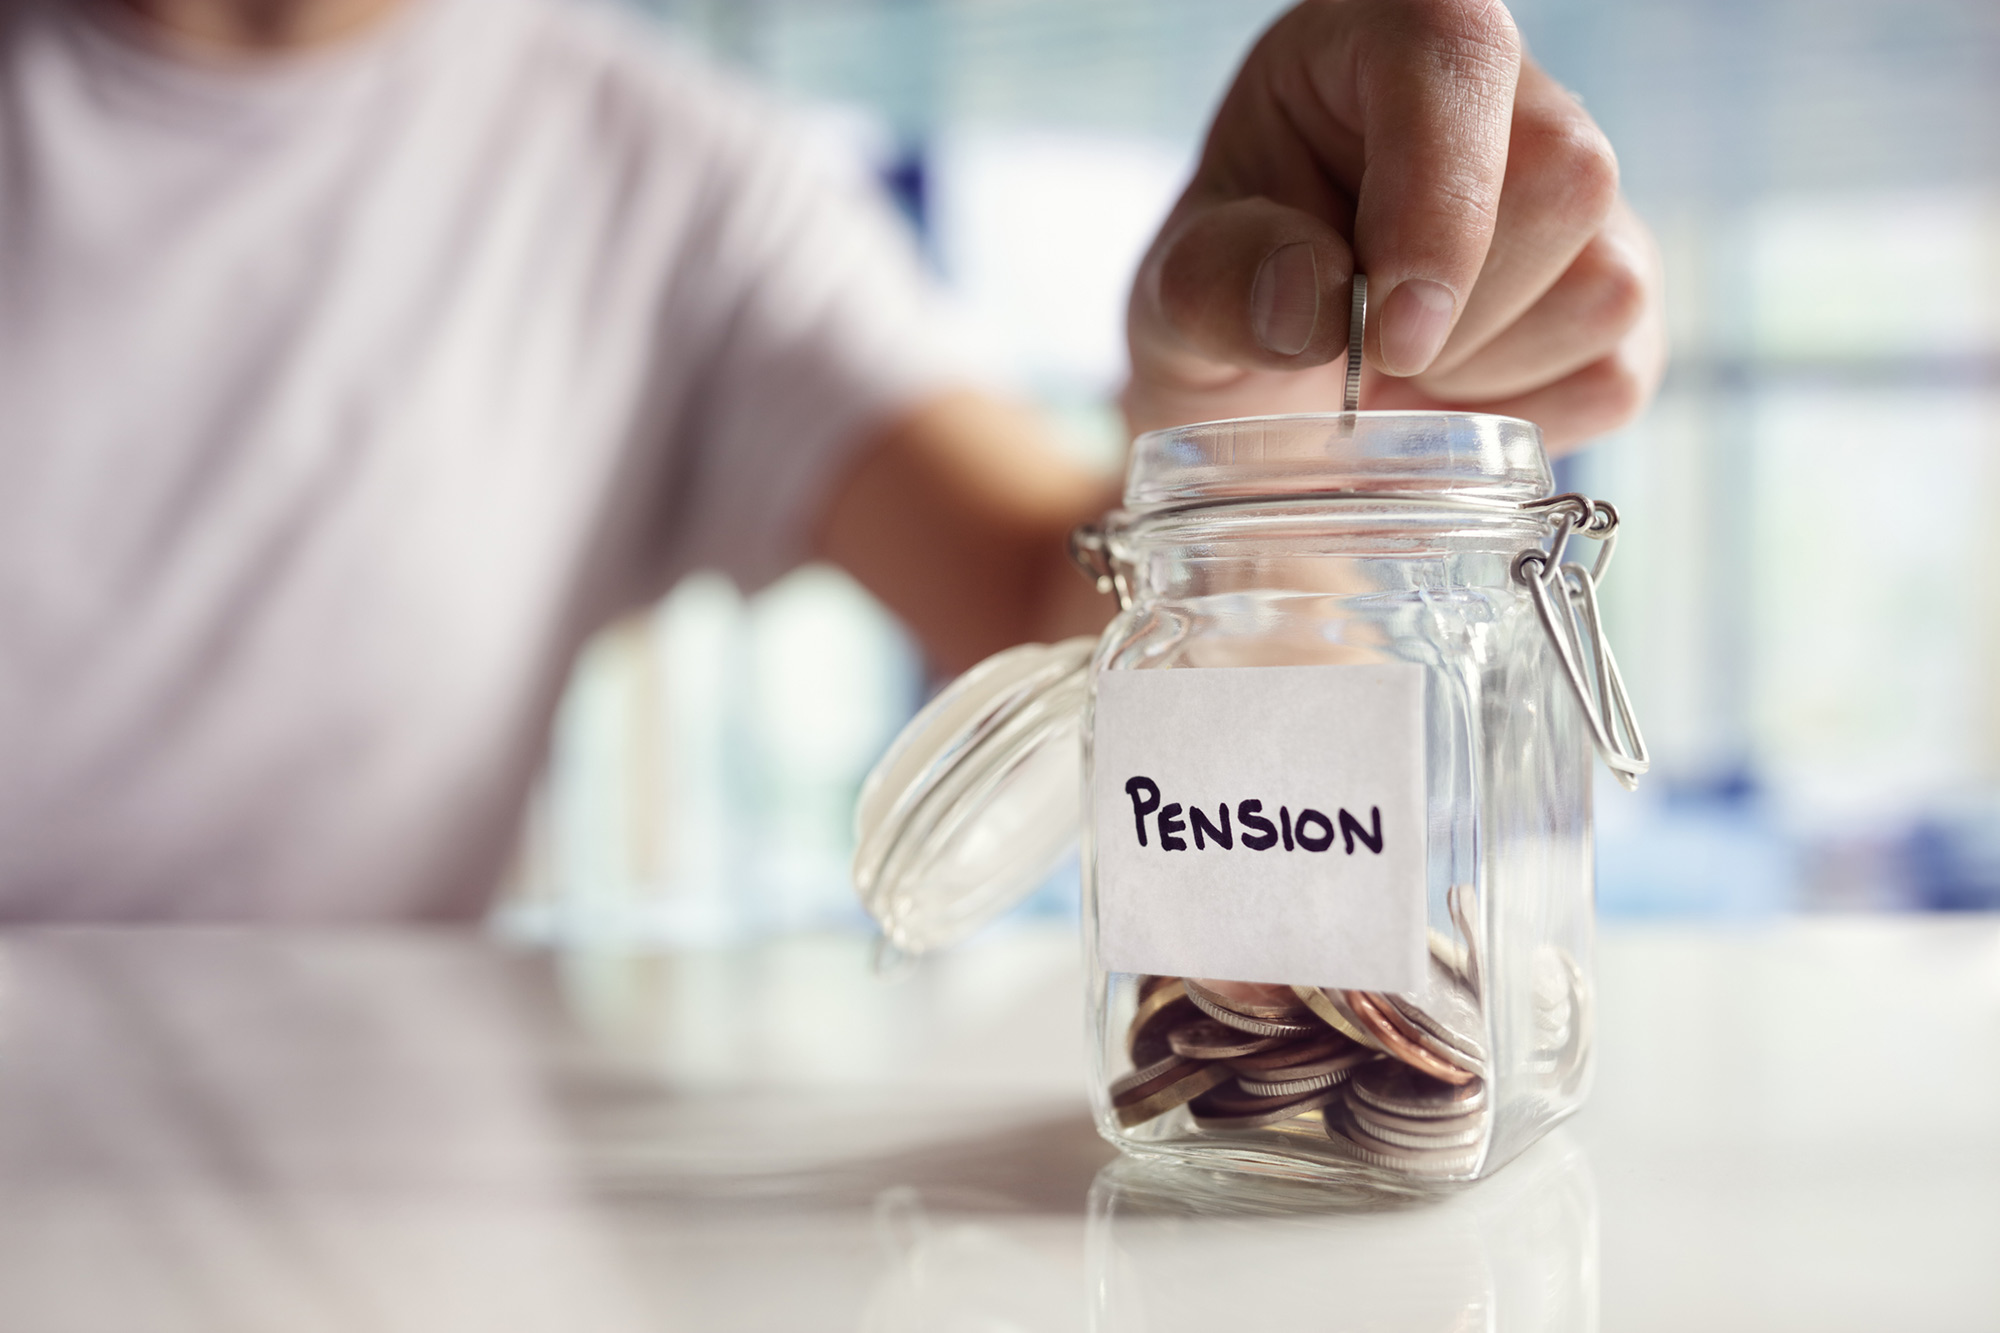 How to start a pension in your 40s